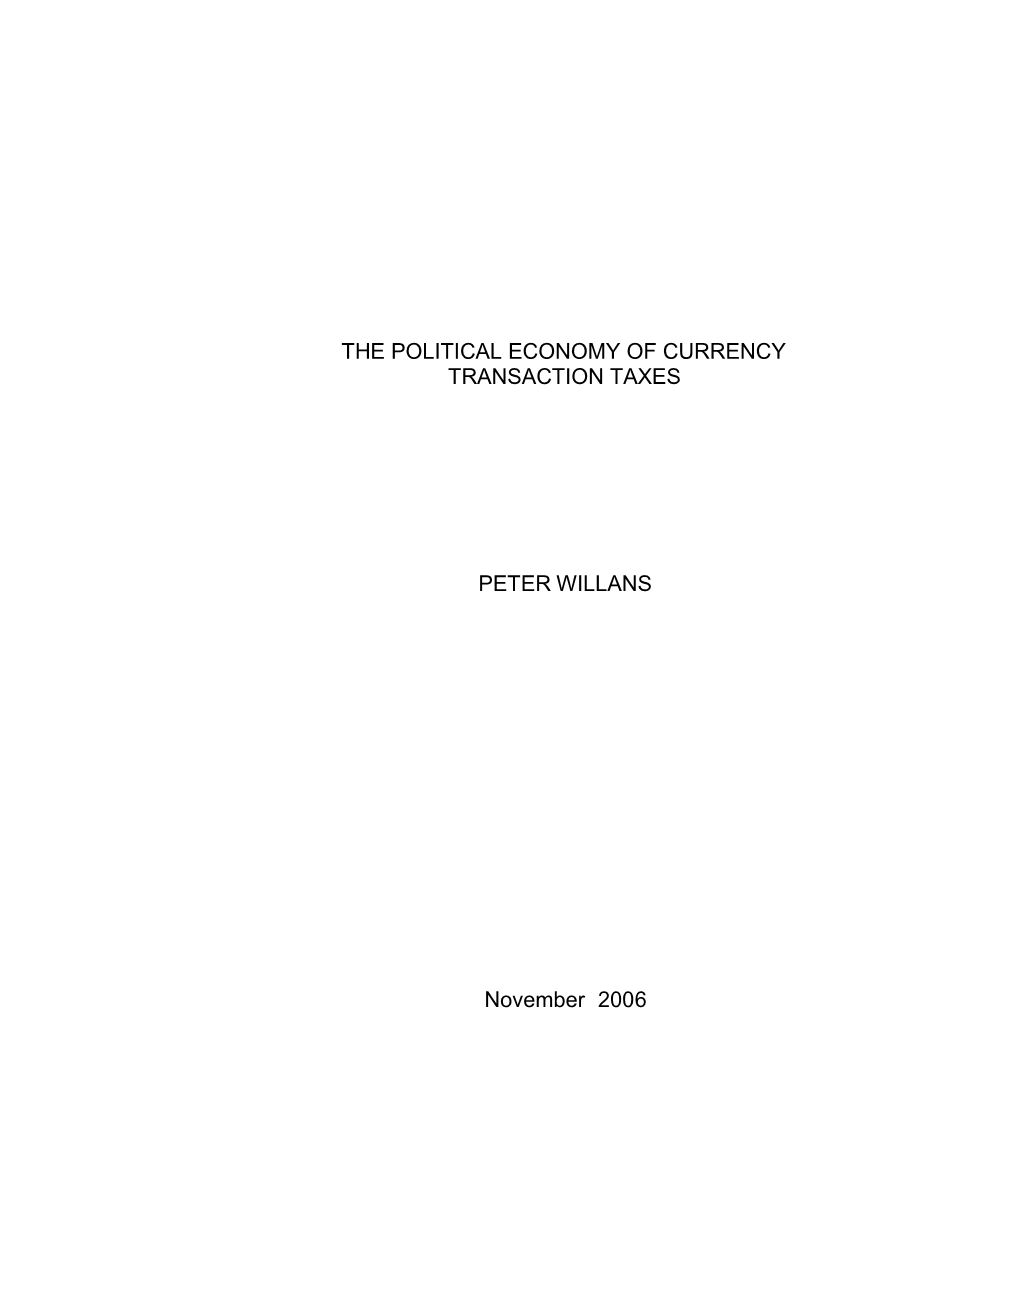 The Political Economy of Currency Transaction Taxes